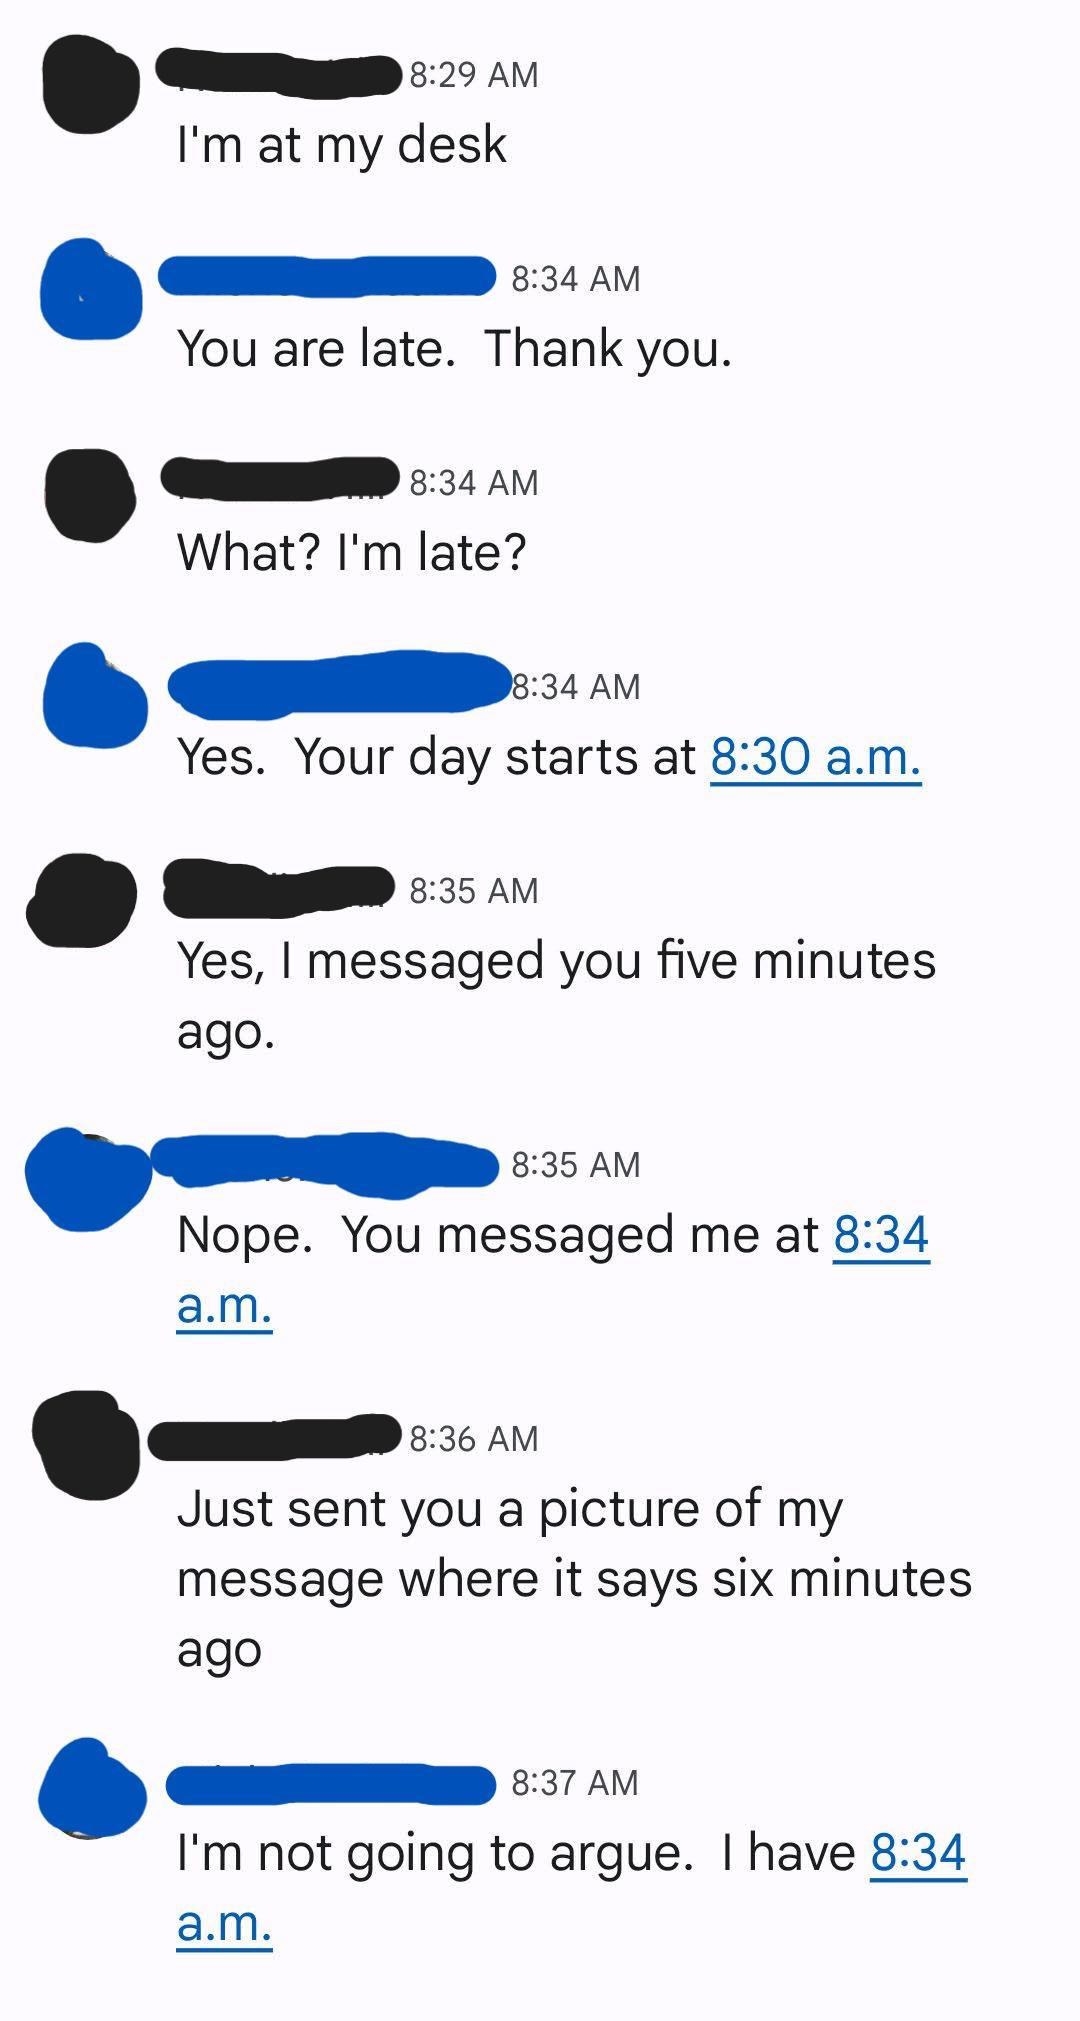 boss getting into an arguement about an employee being minutes late